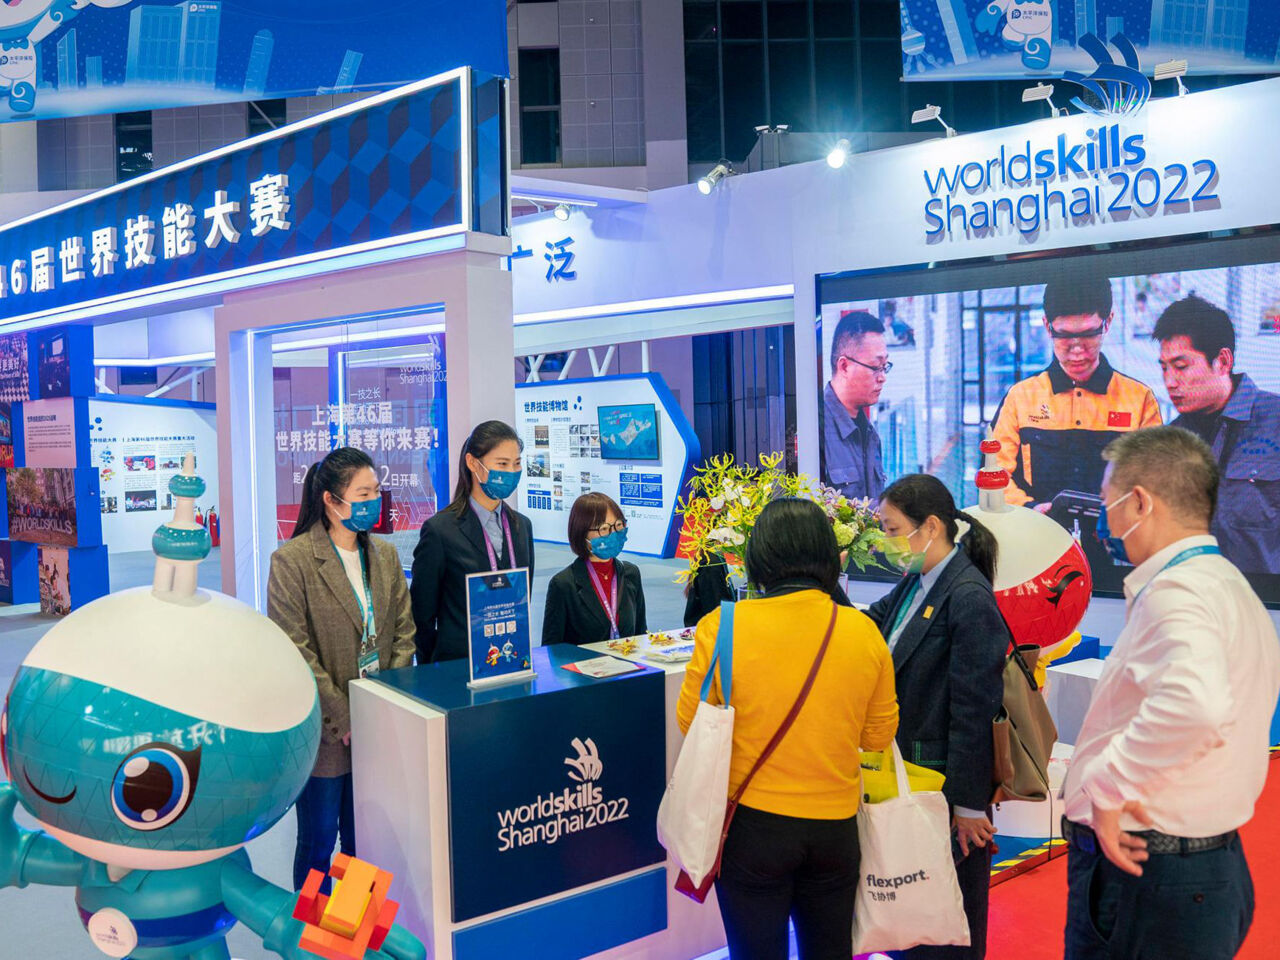 WorldSkills Shanghai 2022 featured in China’s annual Expo